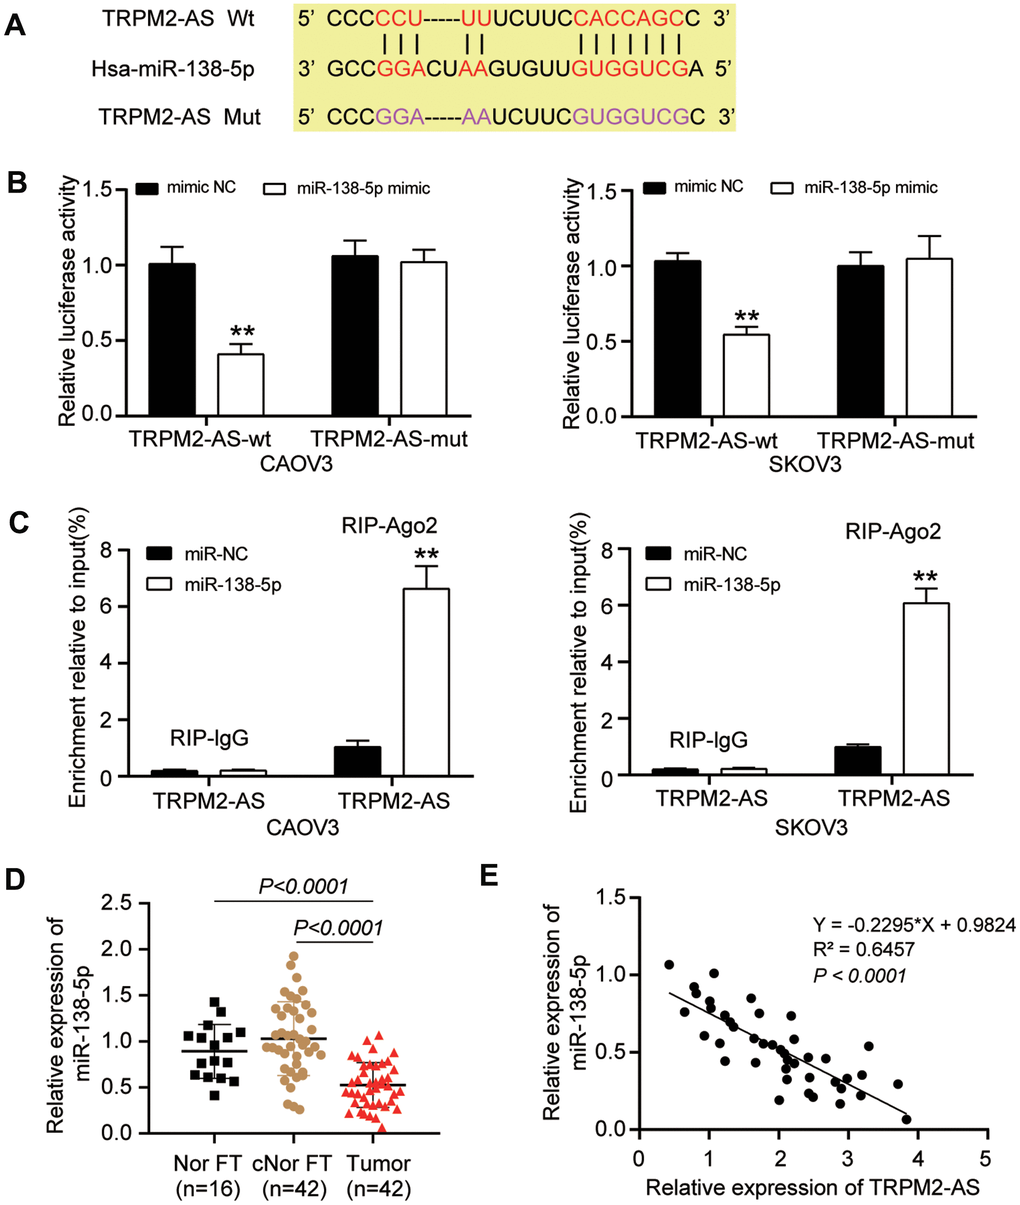 TRPM2-AS could sponge miR-138-5p. (A) ENCORI starBase predicted the binding site between TRPM2-AS and miR-138-5p. (B) The TRPM2-AS could sponge miR-138-5p, validated by luciferase assay. TRPM2-AS-wt, wild-type TRPM2-AS containing the binding site. TRPM2-AS-mut, mutant TRPM2-AS without the binding site. (C) RIP assay further proved the binding site between TRPM2-AS and miR-138-5p. (D) RT-qPCR analysis revealed that the miR-138-5p expression was downregulated in OvC tissues compared with contralateral normal fallopian tube tissues (cNor FT) and normal fallopian tube tissues from patients with benign gynecological tumor (Nor FT). (E) The expression of TRPM2-AS and miR-138-5p was negatively correlated. **P